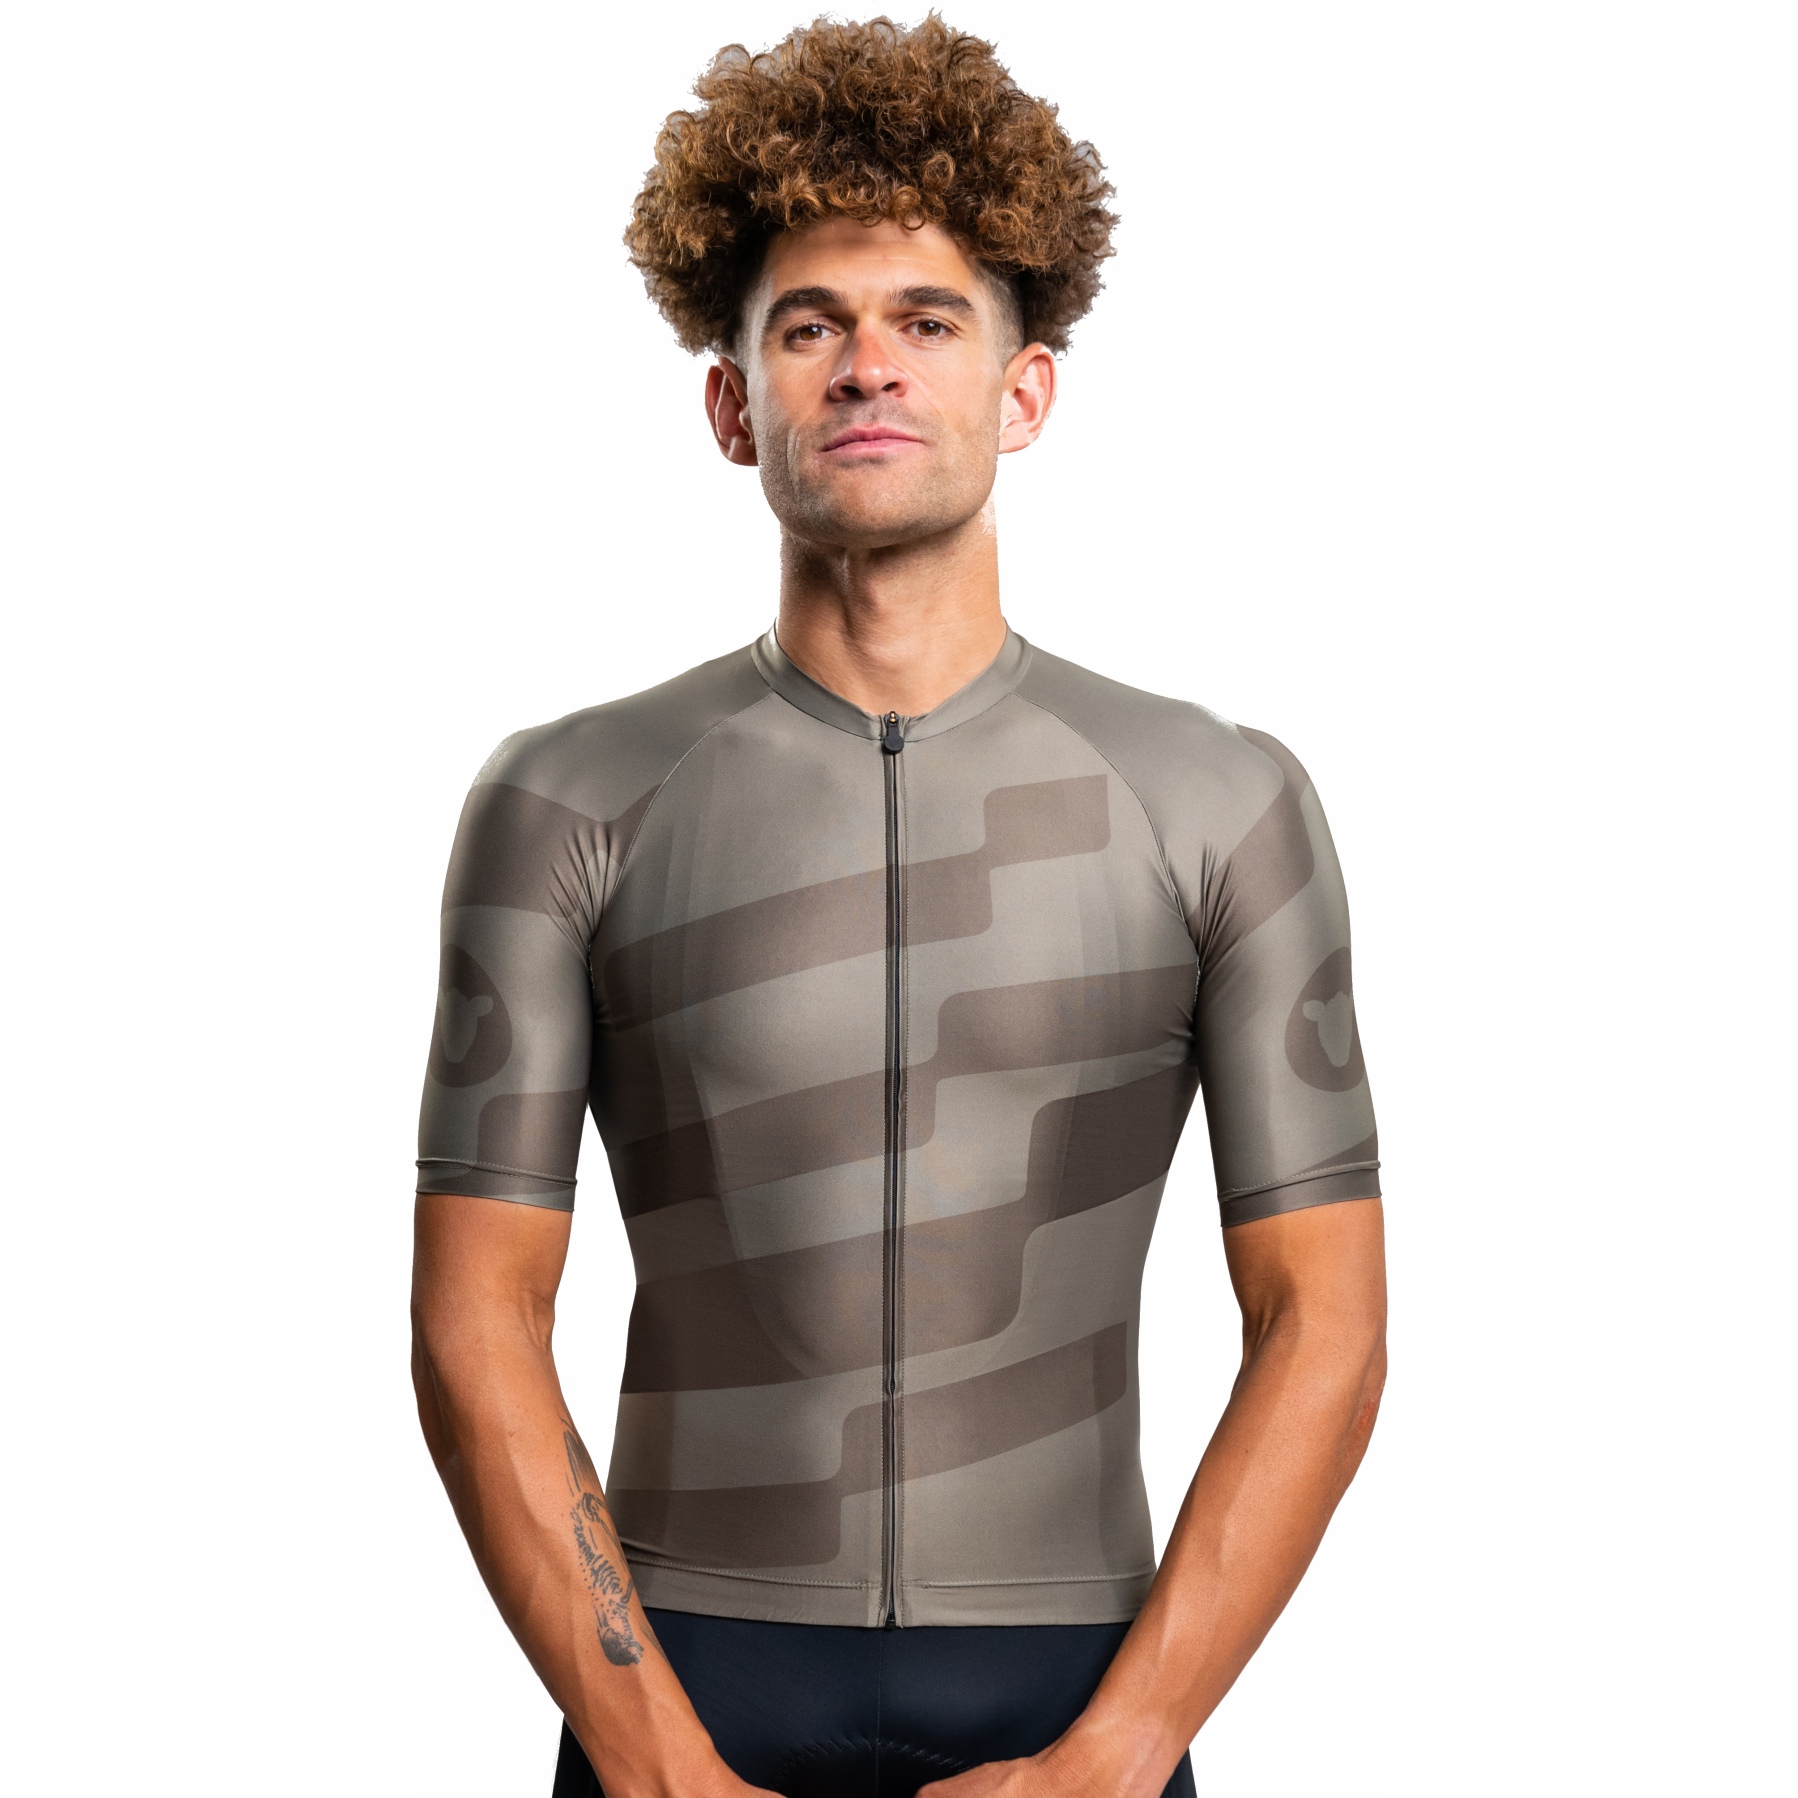 Picture of Black Sheep Cycling Essentials TOUR Short Sleeve Jersey 2.0 - Sand